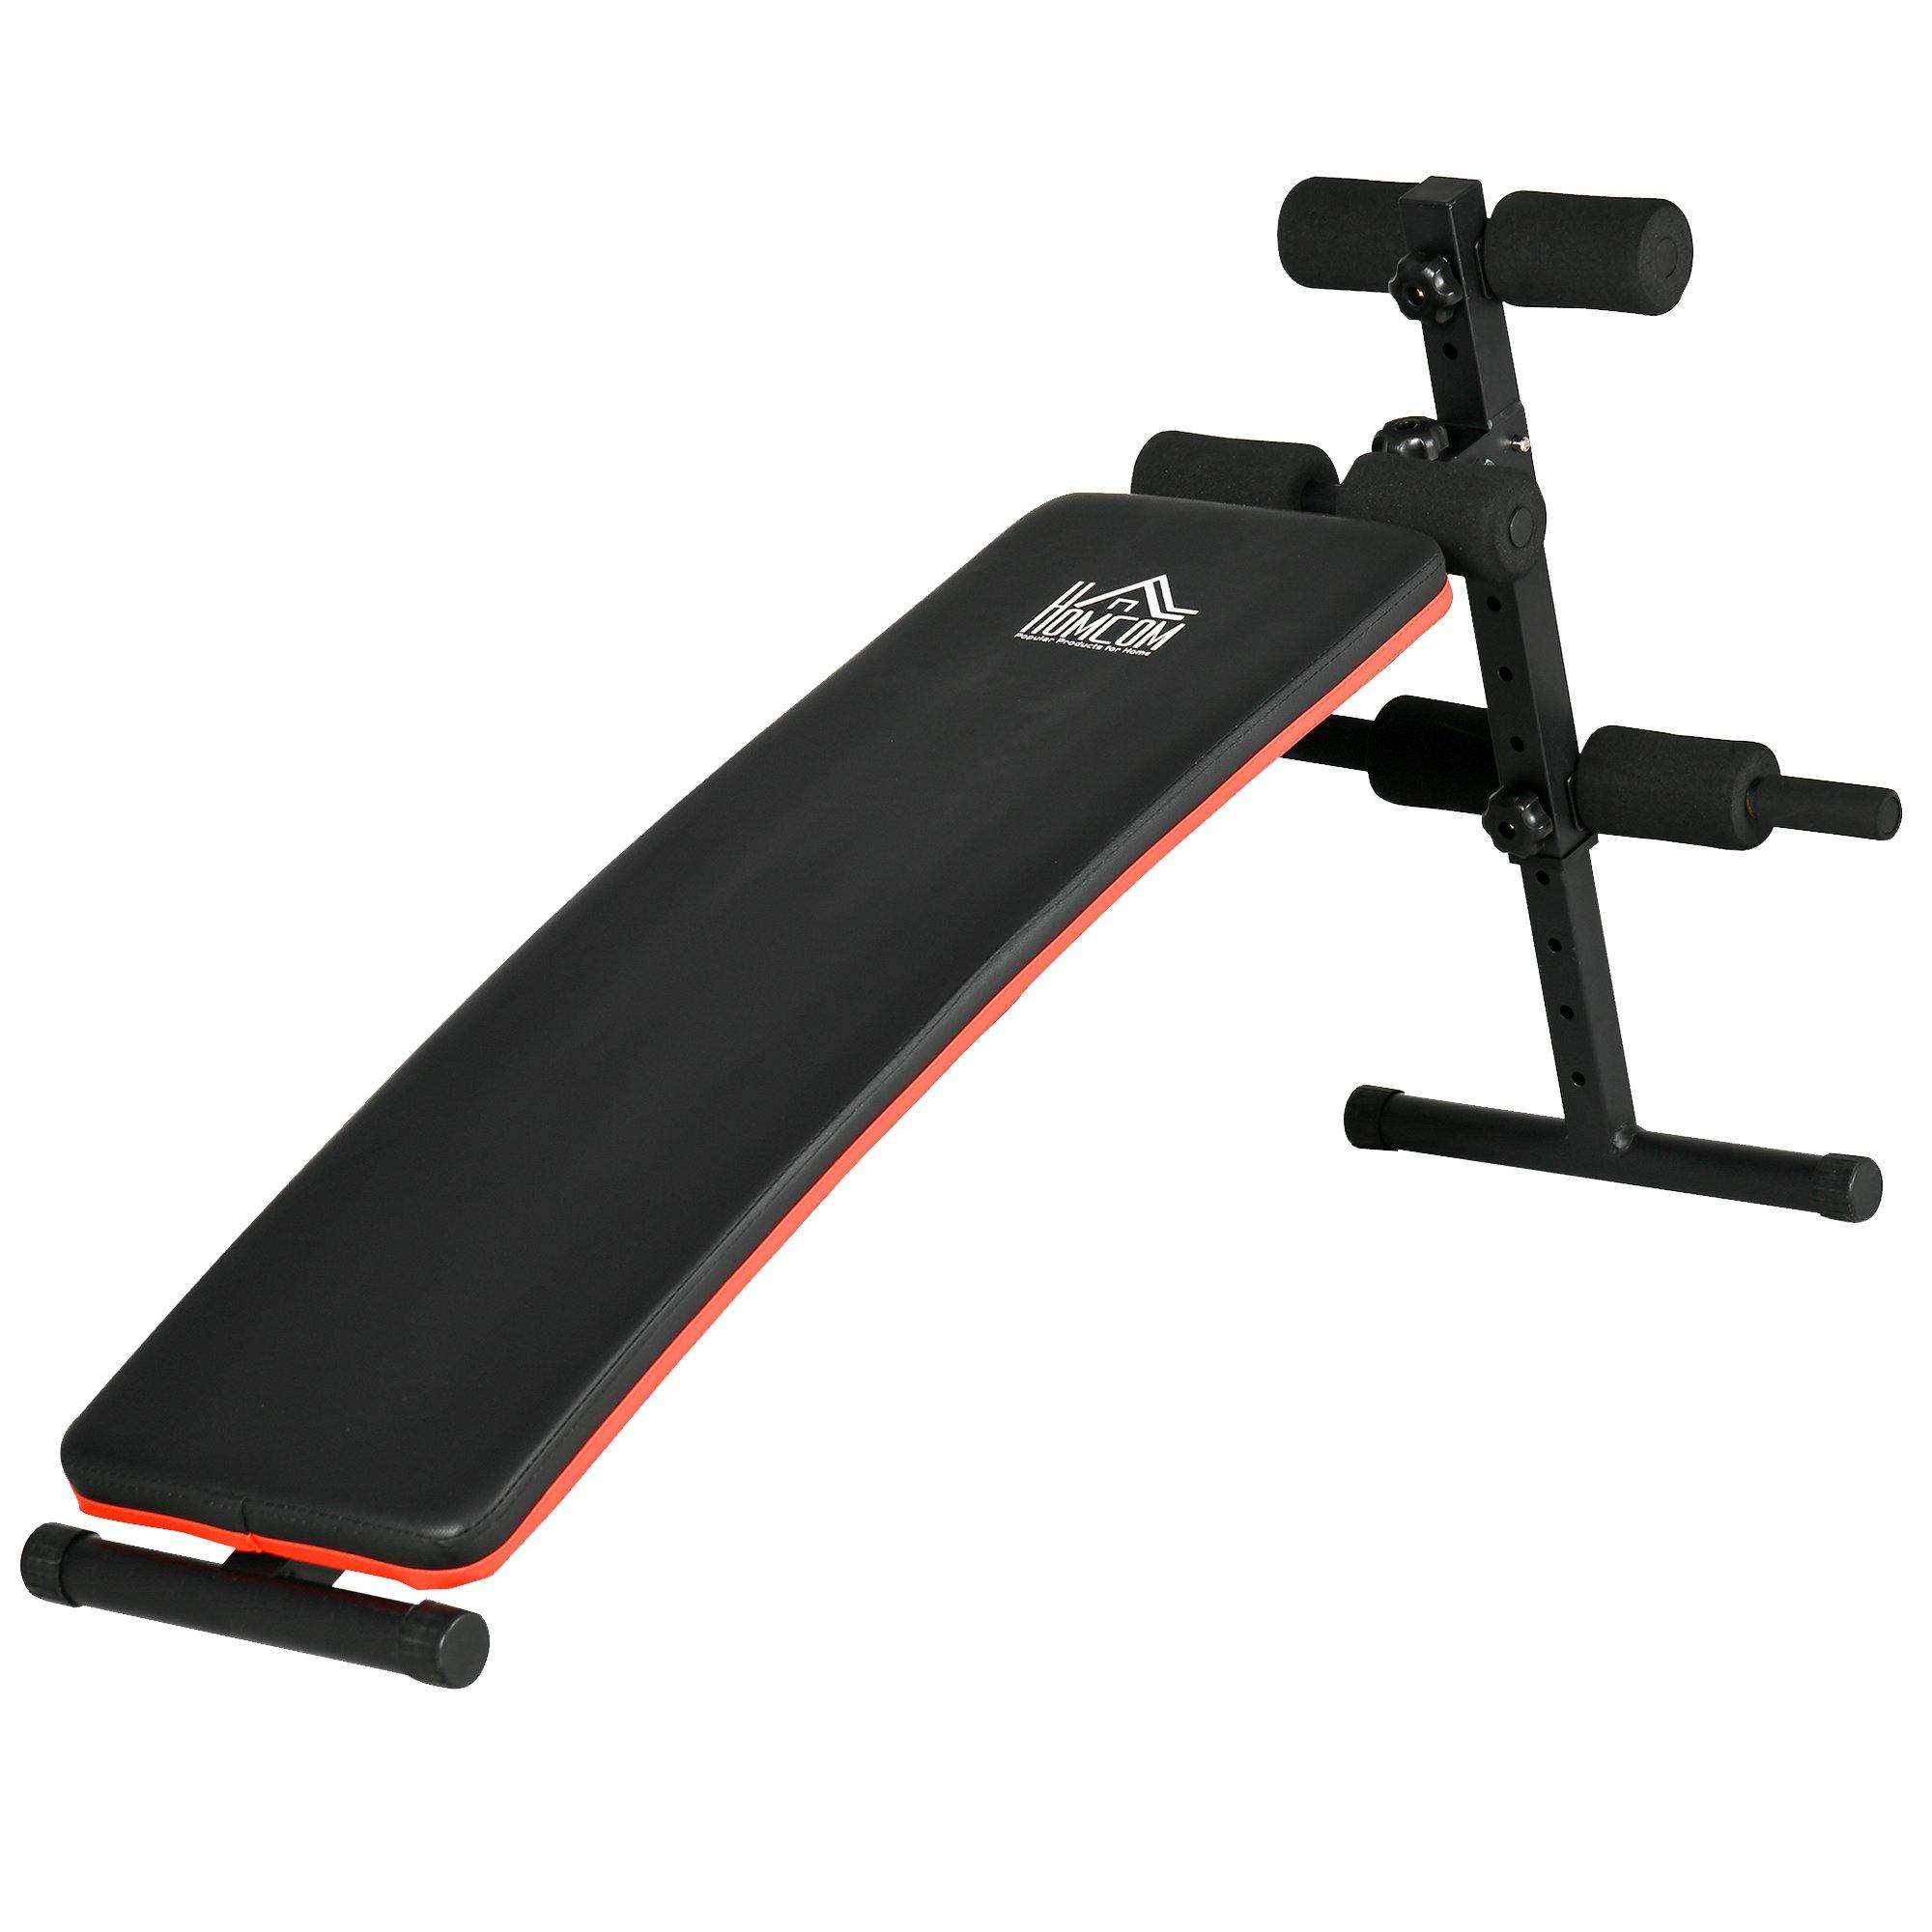 Foldable Sit Up Bench, Adjustable Core Workout Training for Home Gym